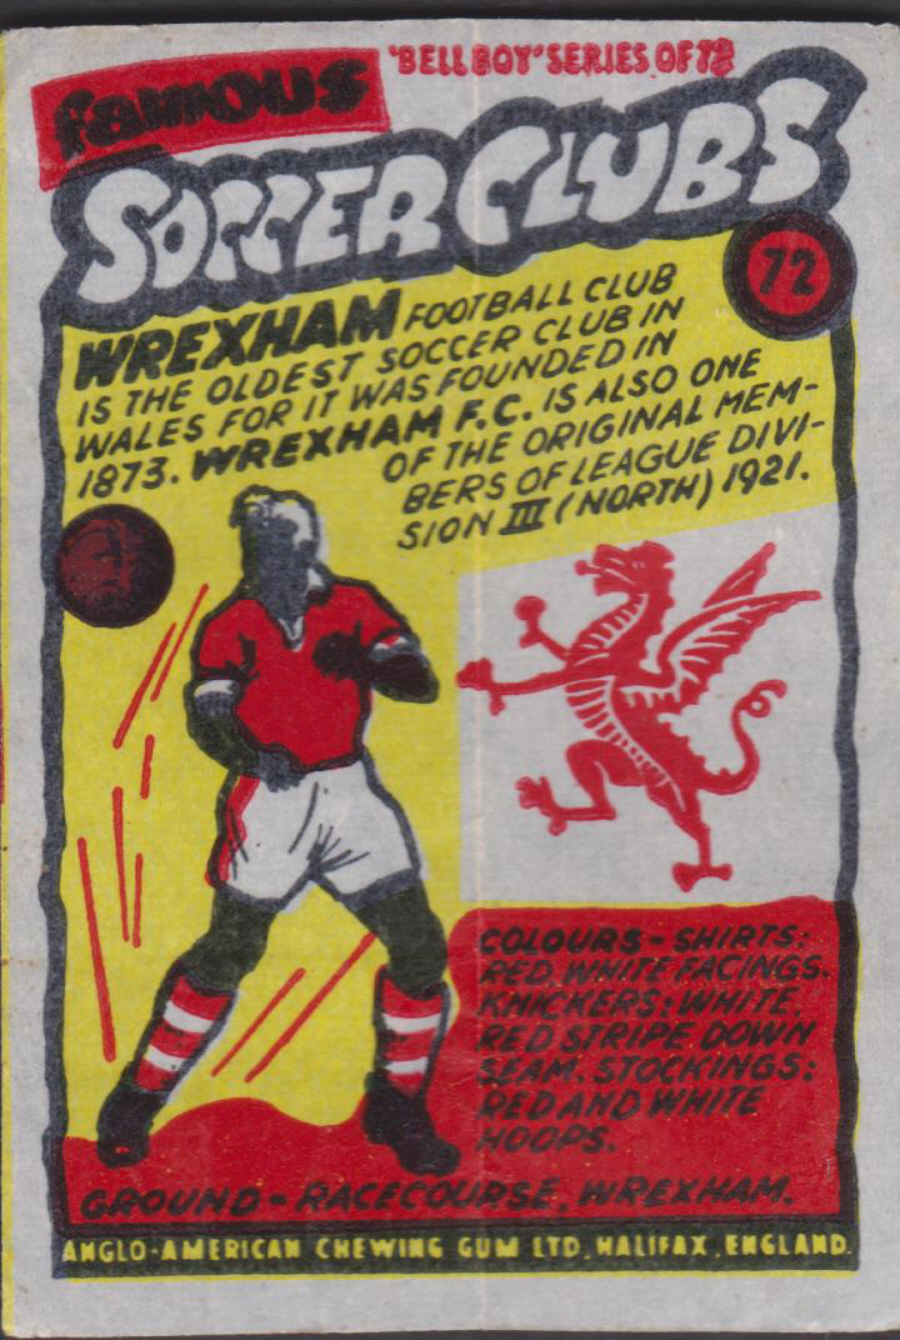 Anglo-American-Chewing-Gum-Wax-Wrapper-Famous-Soccer-Clubs-No-72 - Wrexham F C